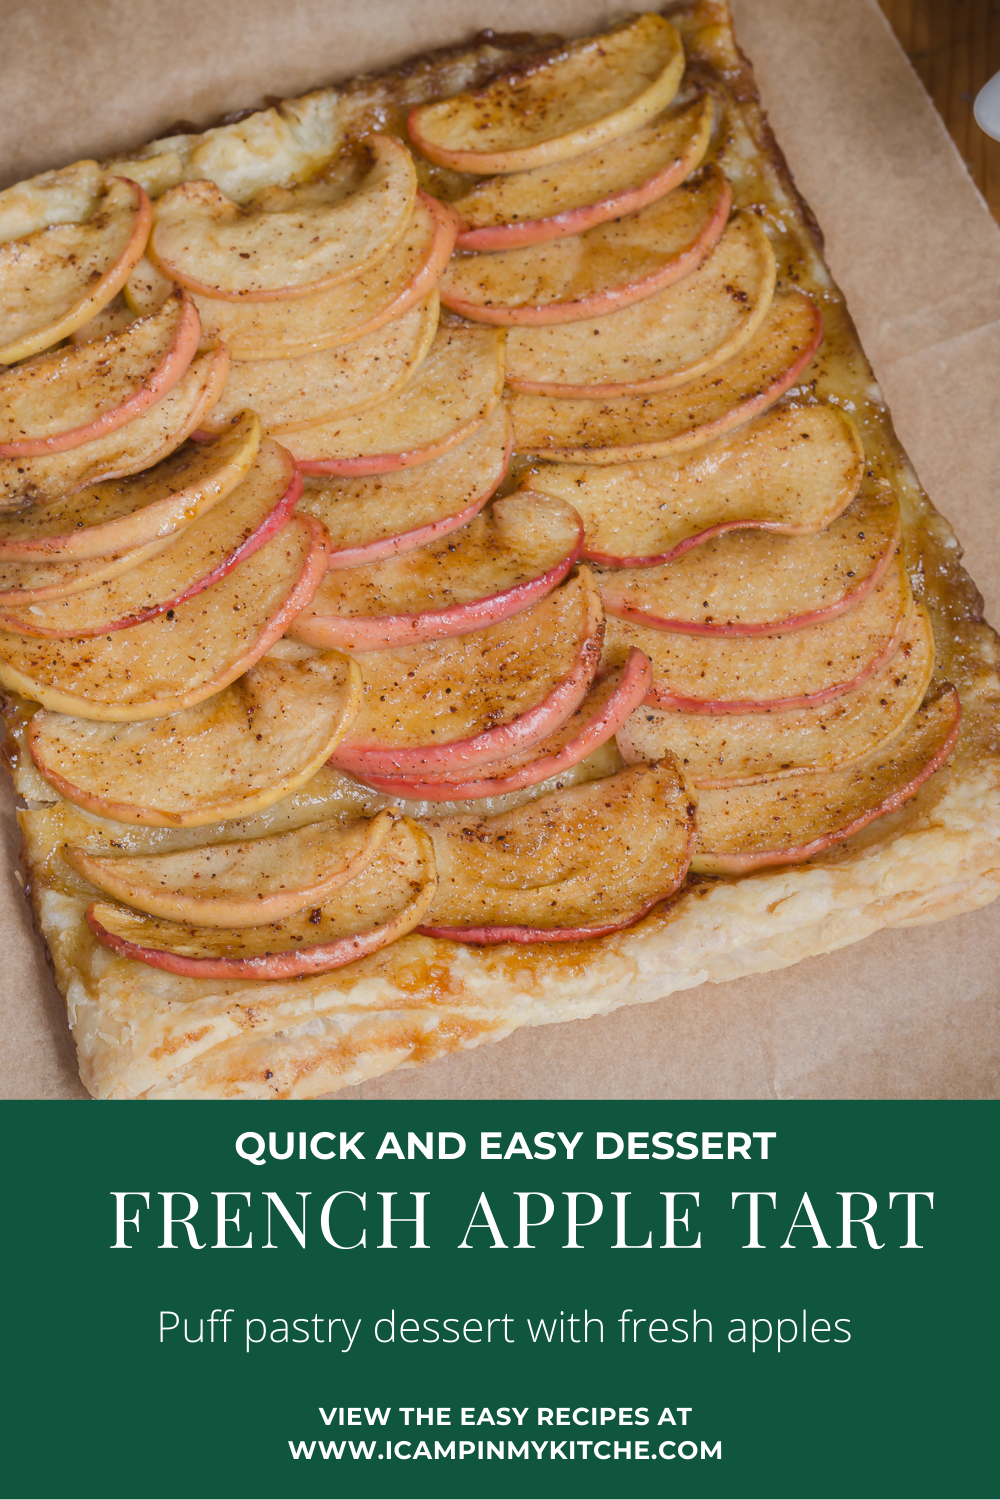 Apple Tart with puff pastry